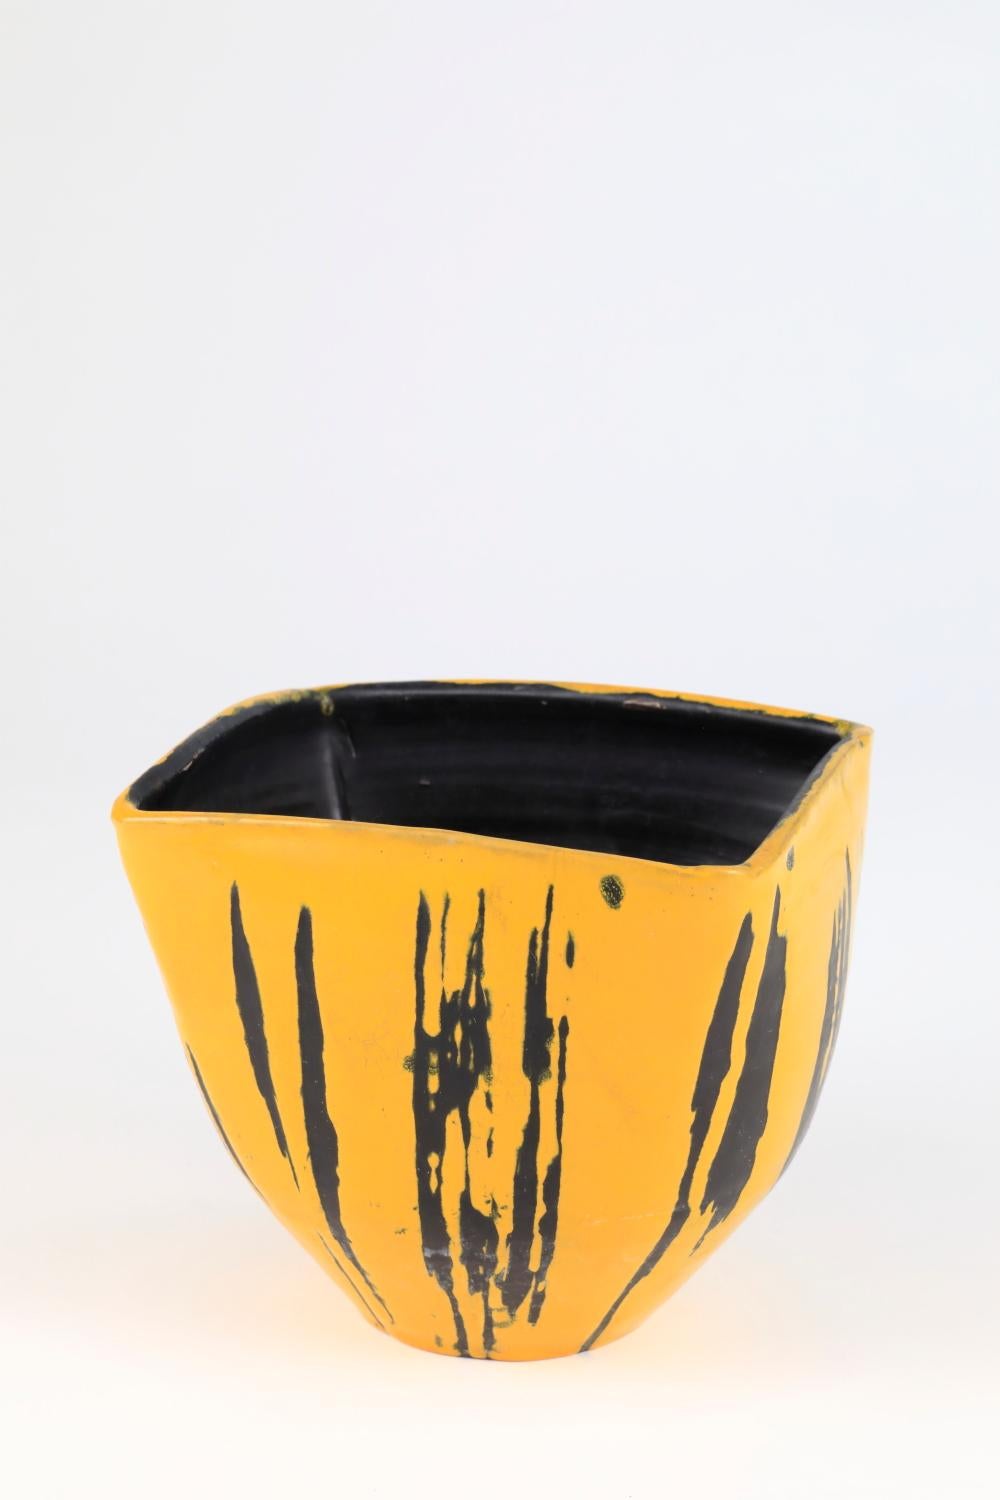 This Livia Gorka ceramic bowl stands out as a truly exceptional piece, embodying the artist's unique vision and expertise. 
The striking combination of black and yellow hues, accented by black stripes, creates a captivating visual contrast that